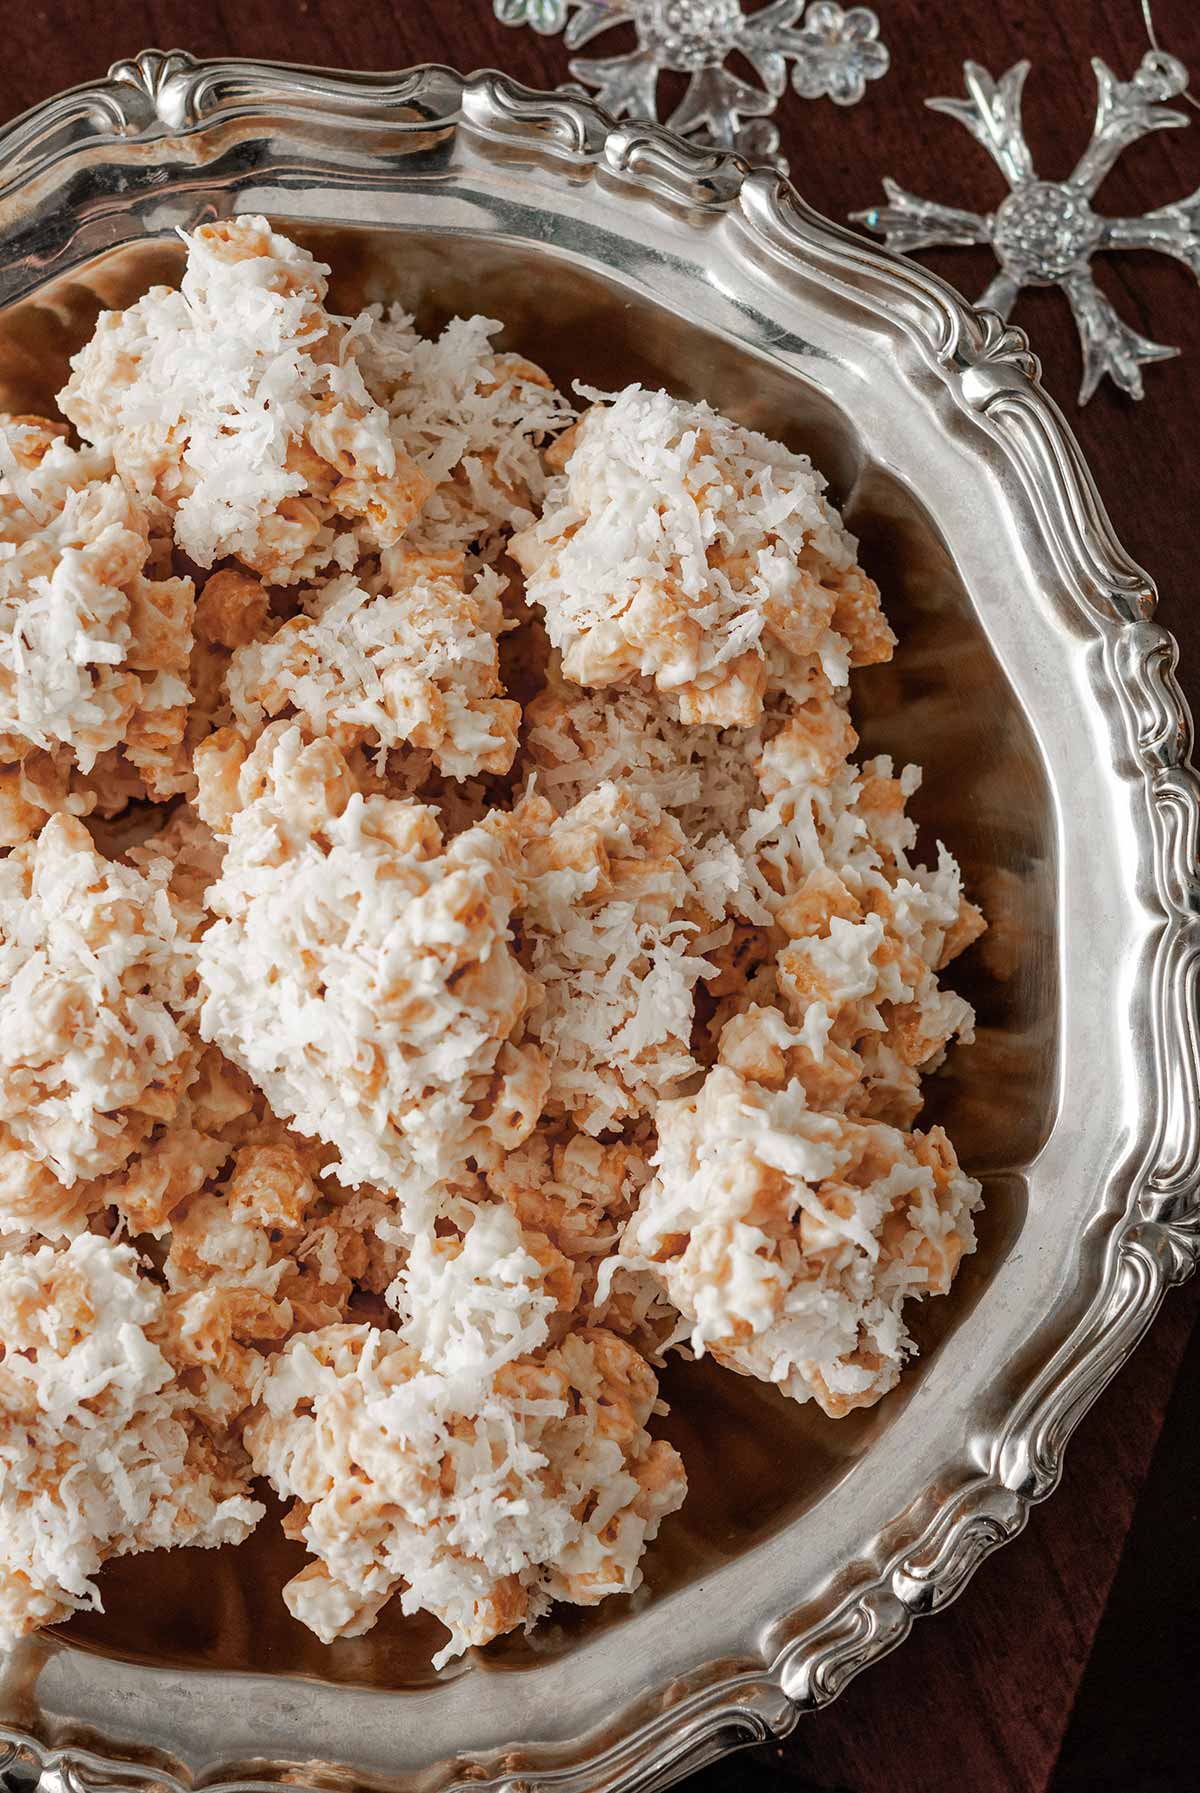 Coconut cookies in a decorative silver bowl with 2 glass snowflake ornaments on a table.